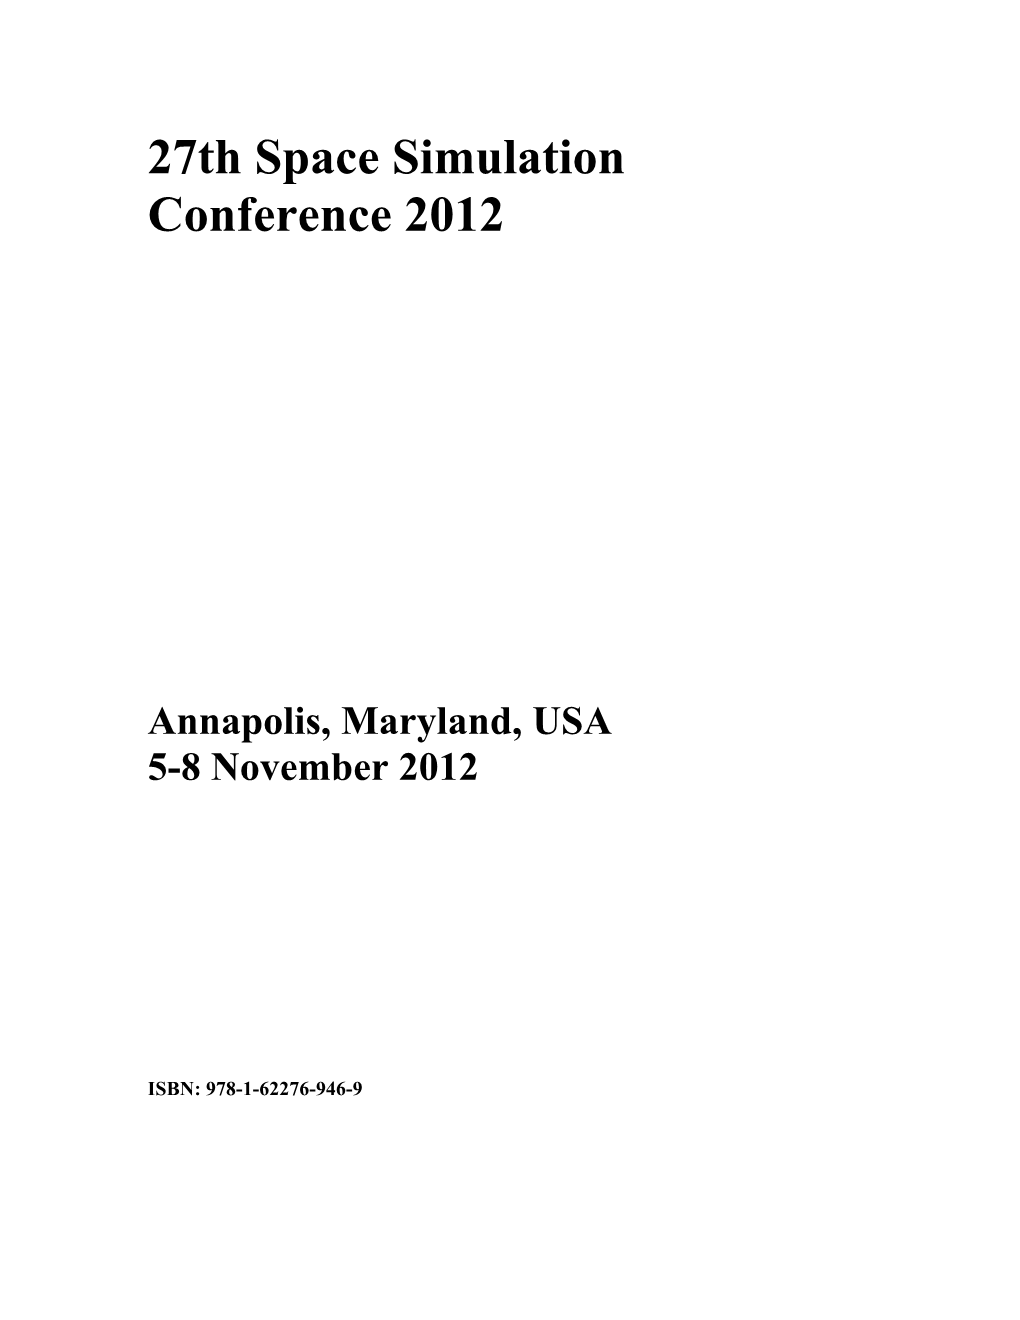 27Th Space Simulation Conference 2012